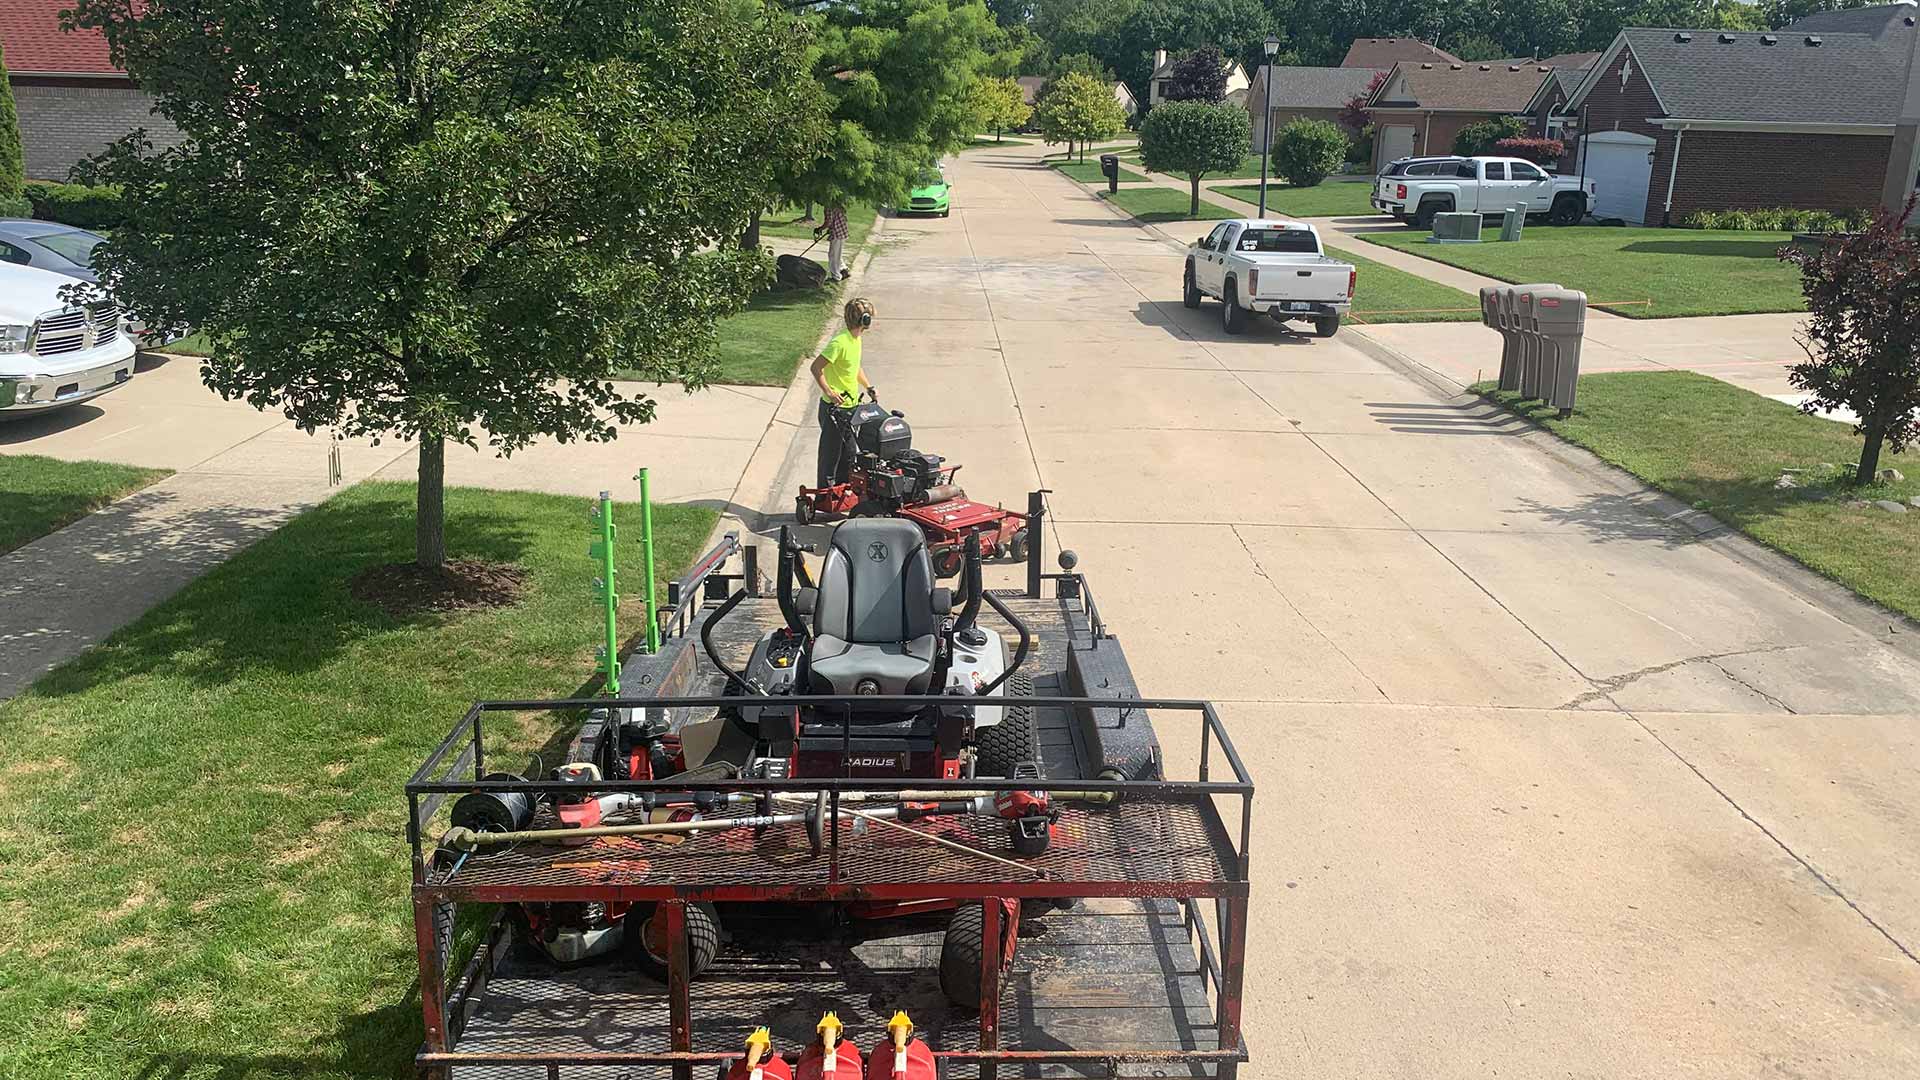 Big Lakes Lawncare worker and mower in Macomb Co, MI.